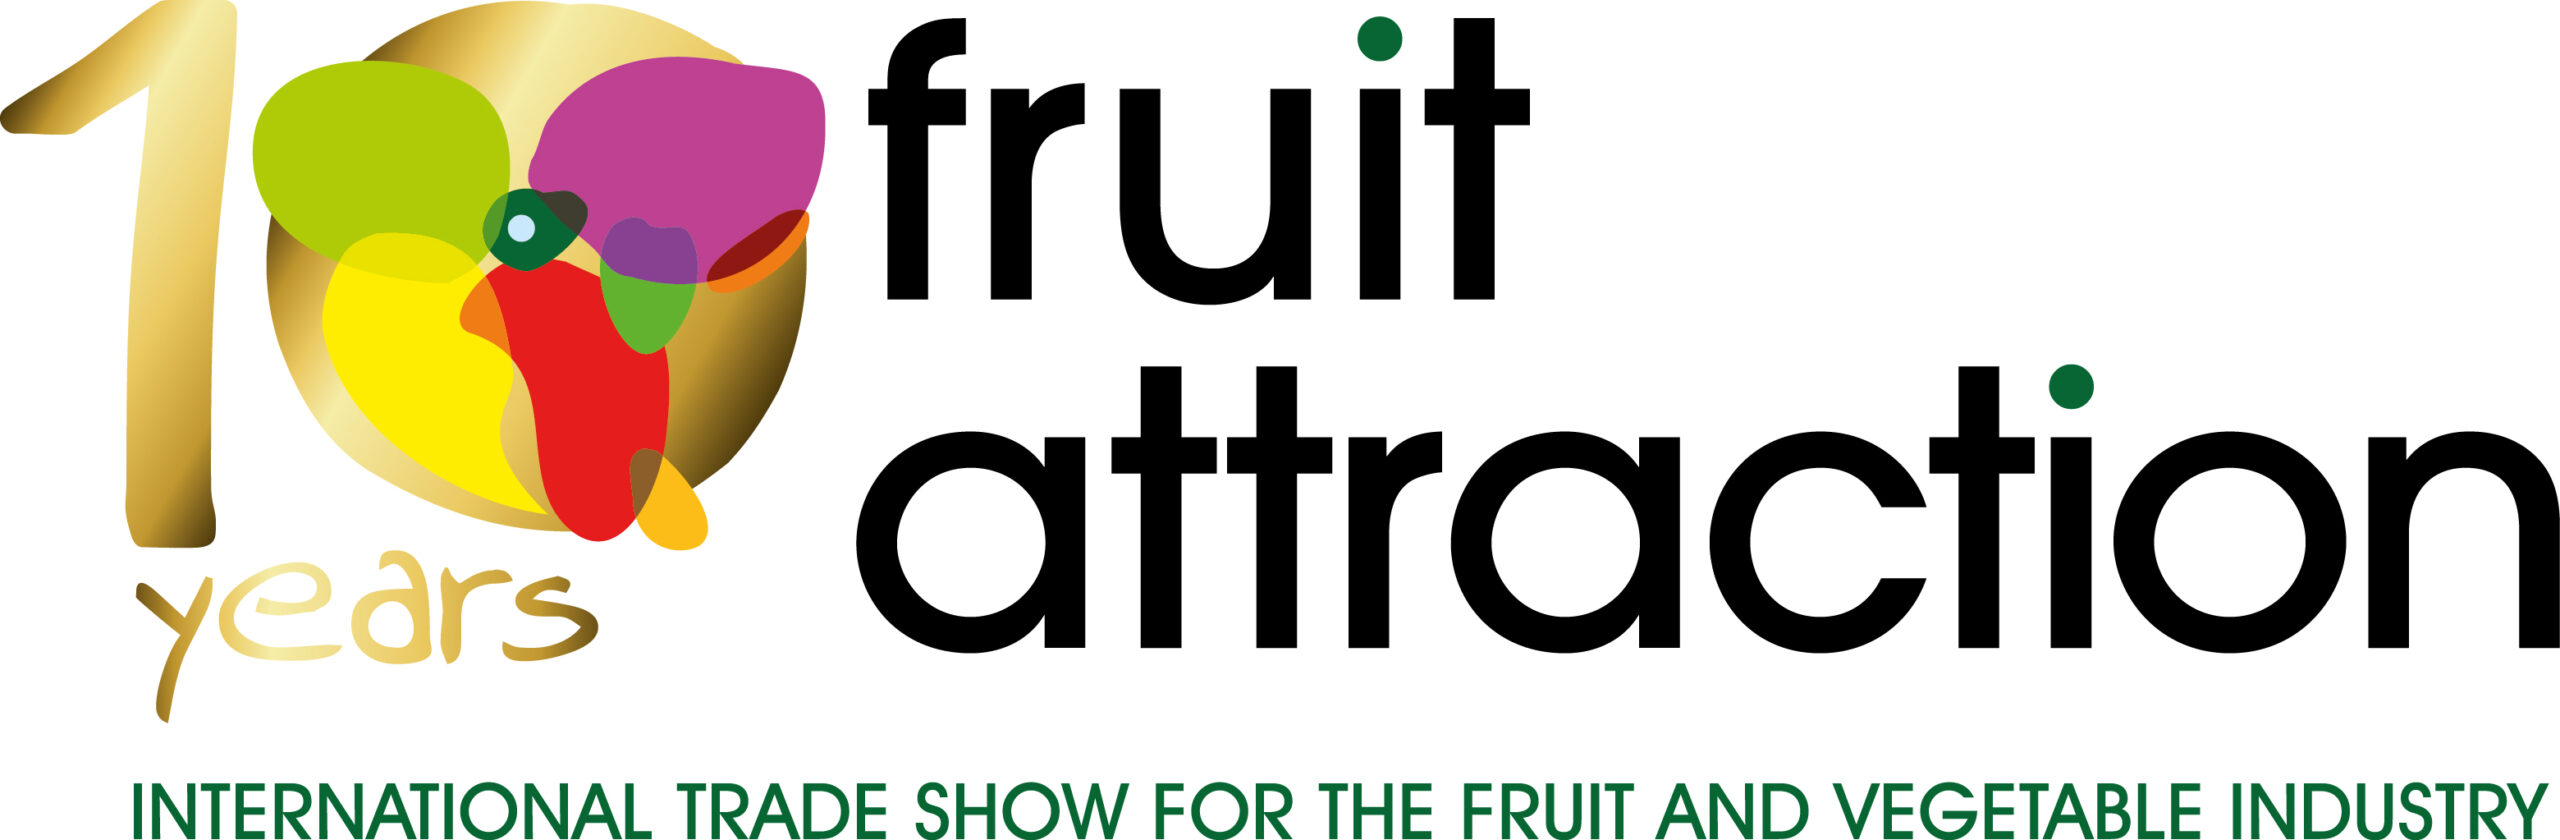 J. Huesa Water Technology will be present as an exhibitor at the 10th edition of Fruit Attraction